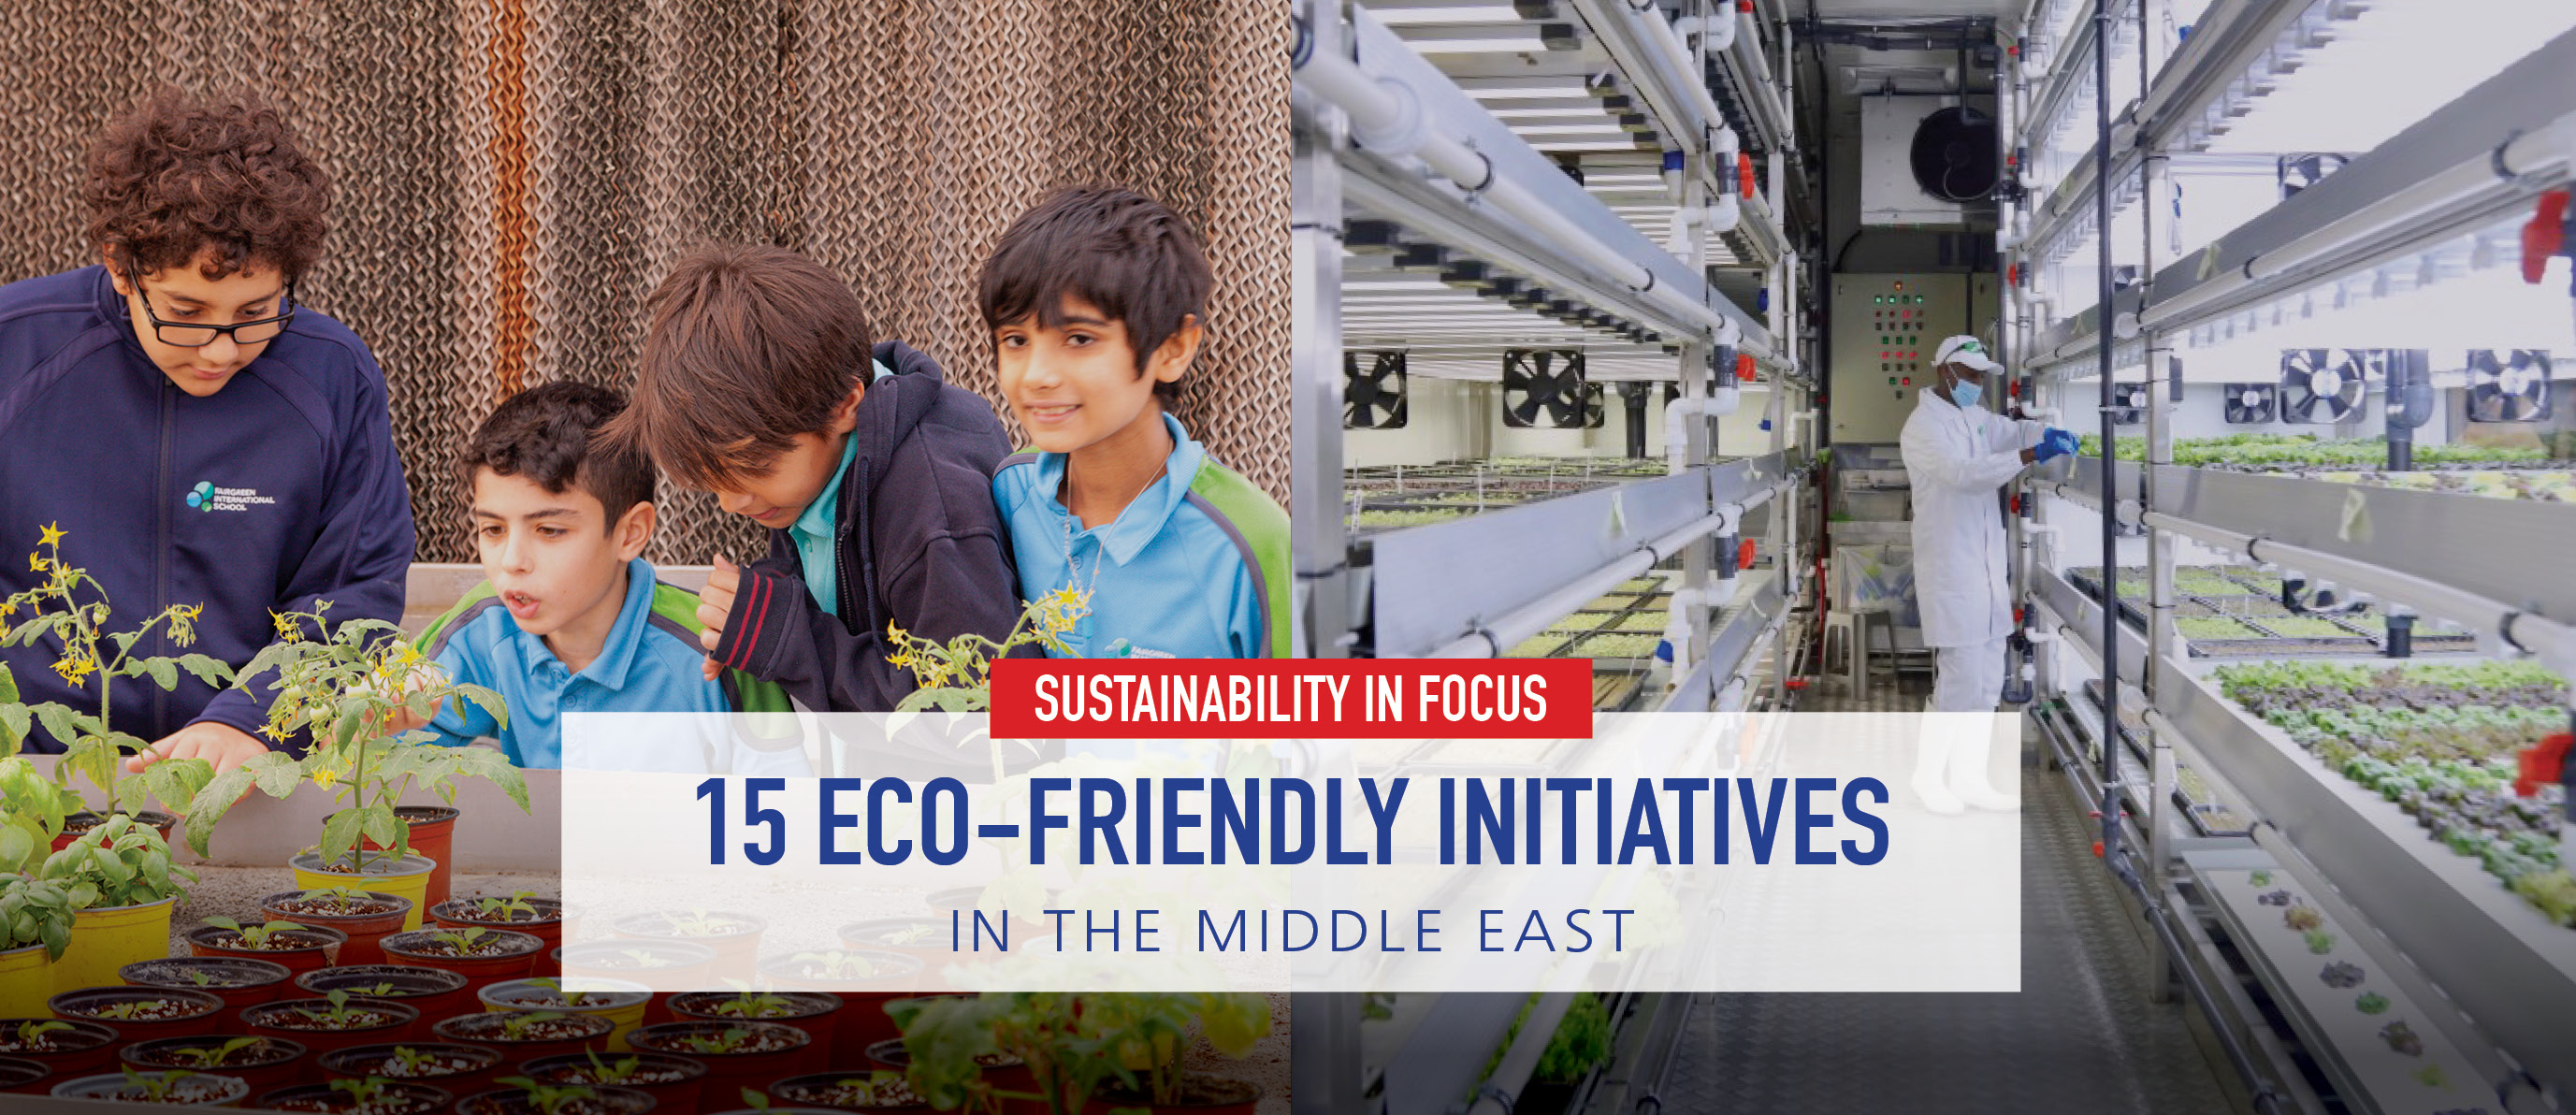 15 Eco-Friendly Initiatives In The Middle East